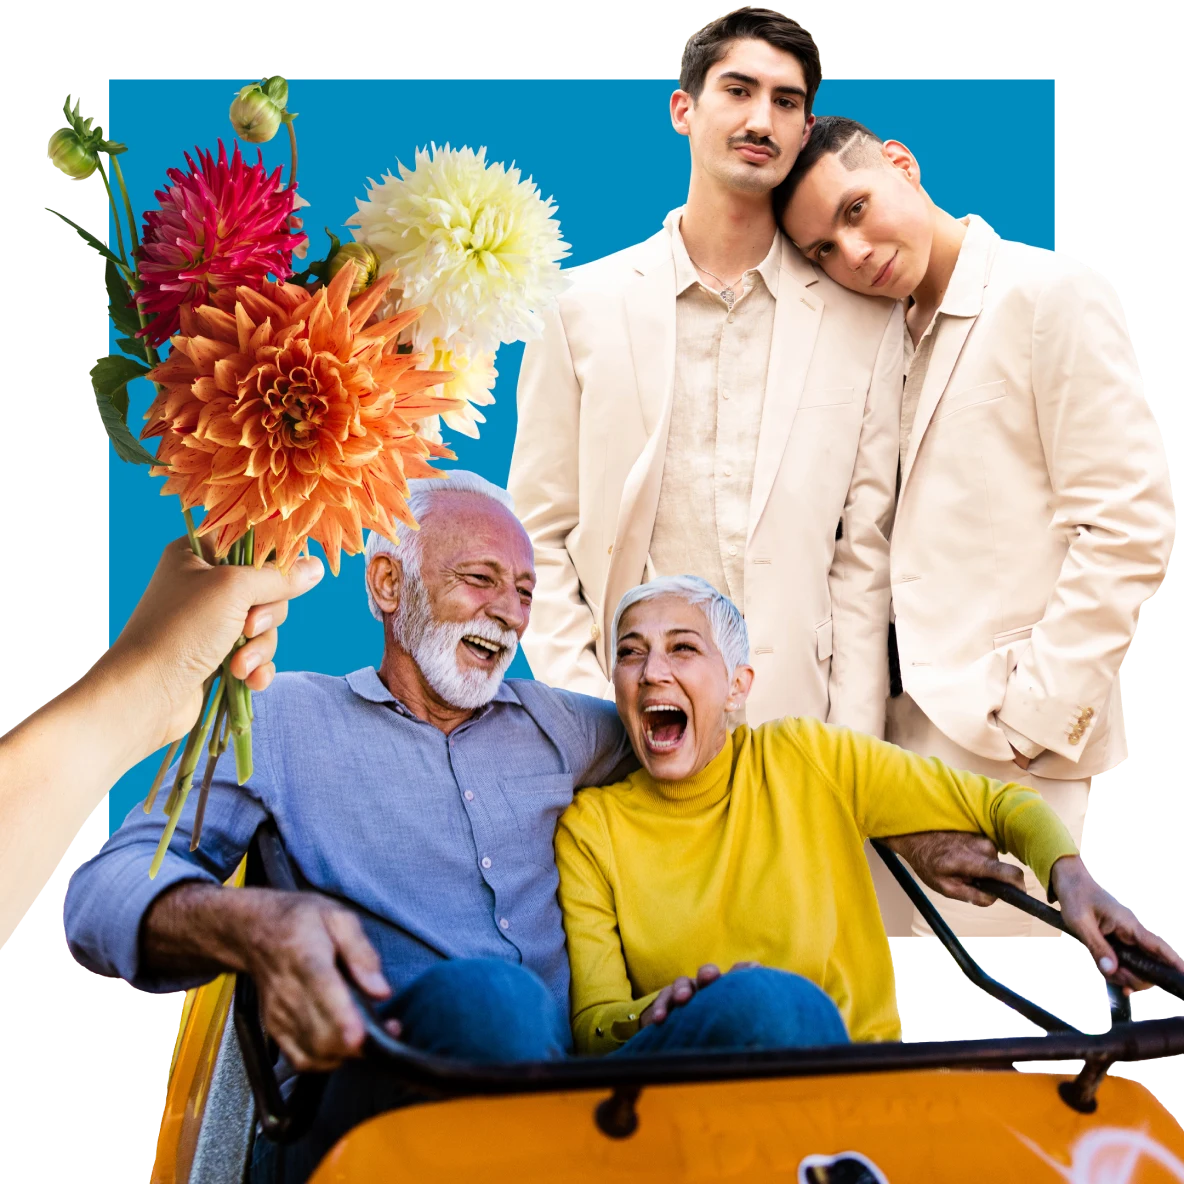 Two pairs of people. White man and Asian man in tan suits at right, one with his head on the other’s shoulder. White hand holds a bouquet of orange flowers at left. Older white man and woman ride in an orange rollercoaster car in the foreground.
